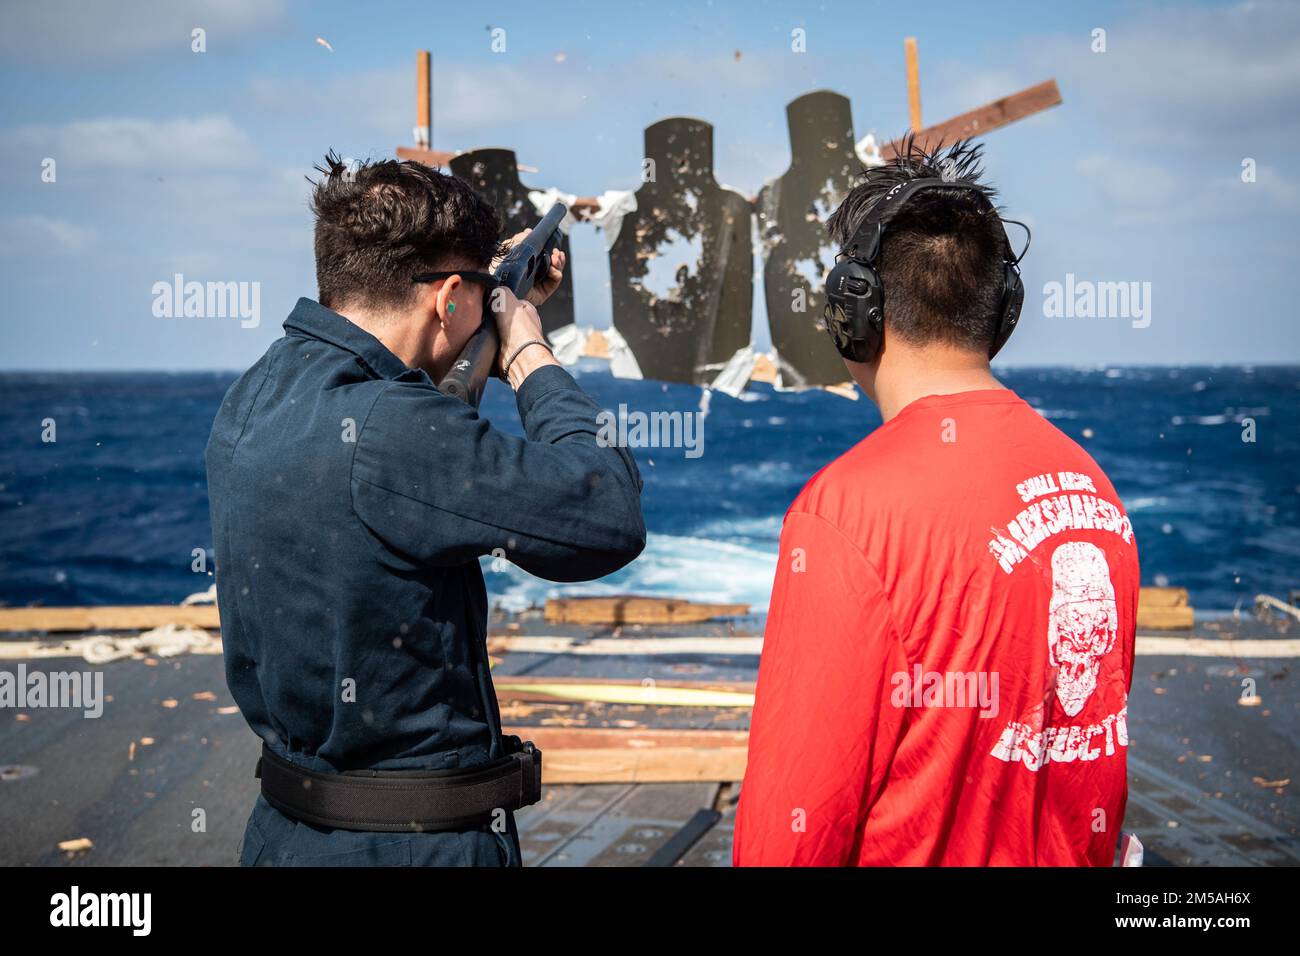 SOUTH CHINA SEA (Feb. 16, 2022) Gunner’s Mate 2nd Class Jeremy Gillentine, right, from Abilene, Texas, acts as Range Safety Officer while Gunner’s Mate Seaman Cade Kevek, from Union Grove, Wisconsin, fires the M500 shotgun during a qualification course aboard the Arleigh Burke-class guided-missile destroyer USS Dewey (DDG 105). Dewey is assigned to Destroyer Squadron (DESRON) 15 and is underway supporting a free and open Indo-Pacific. CTF 71/DESRON 15 is the Navy’s largest forward-deployed DESRON and the U.S. 7th Fleet’s principal surface force. Stock Photo